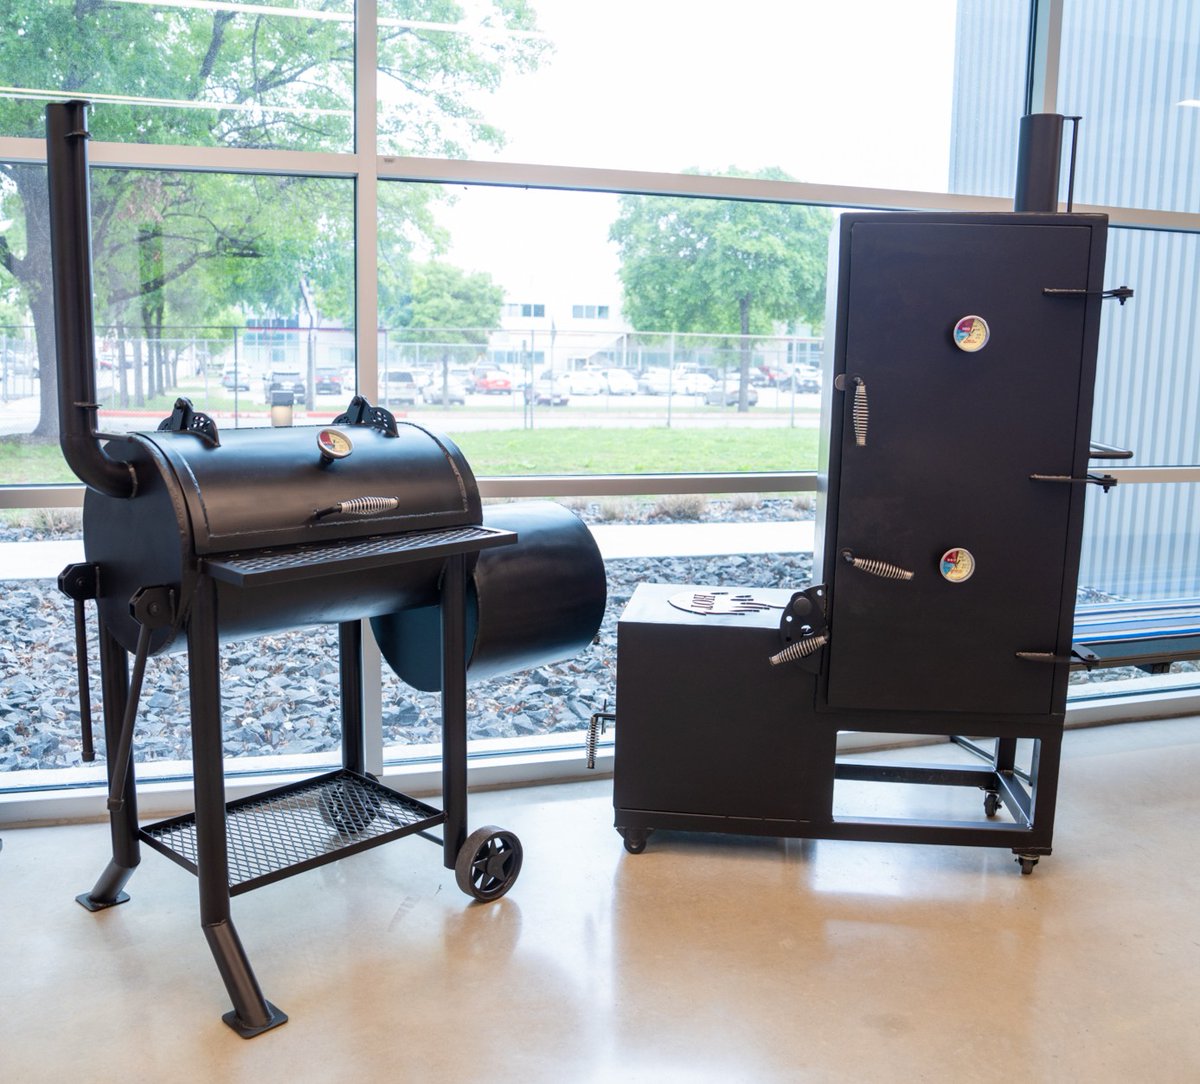 Hey Tiger Nation! We are raffling three BBQ pits at this year’s CultureFest and Rib Cook-Off event. The drawing will be held at 3:10 p.m. April 25, on the stage. To purchase tickets and for more information, visit alamo.edu/spc/culturefest.